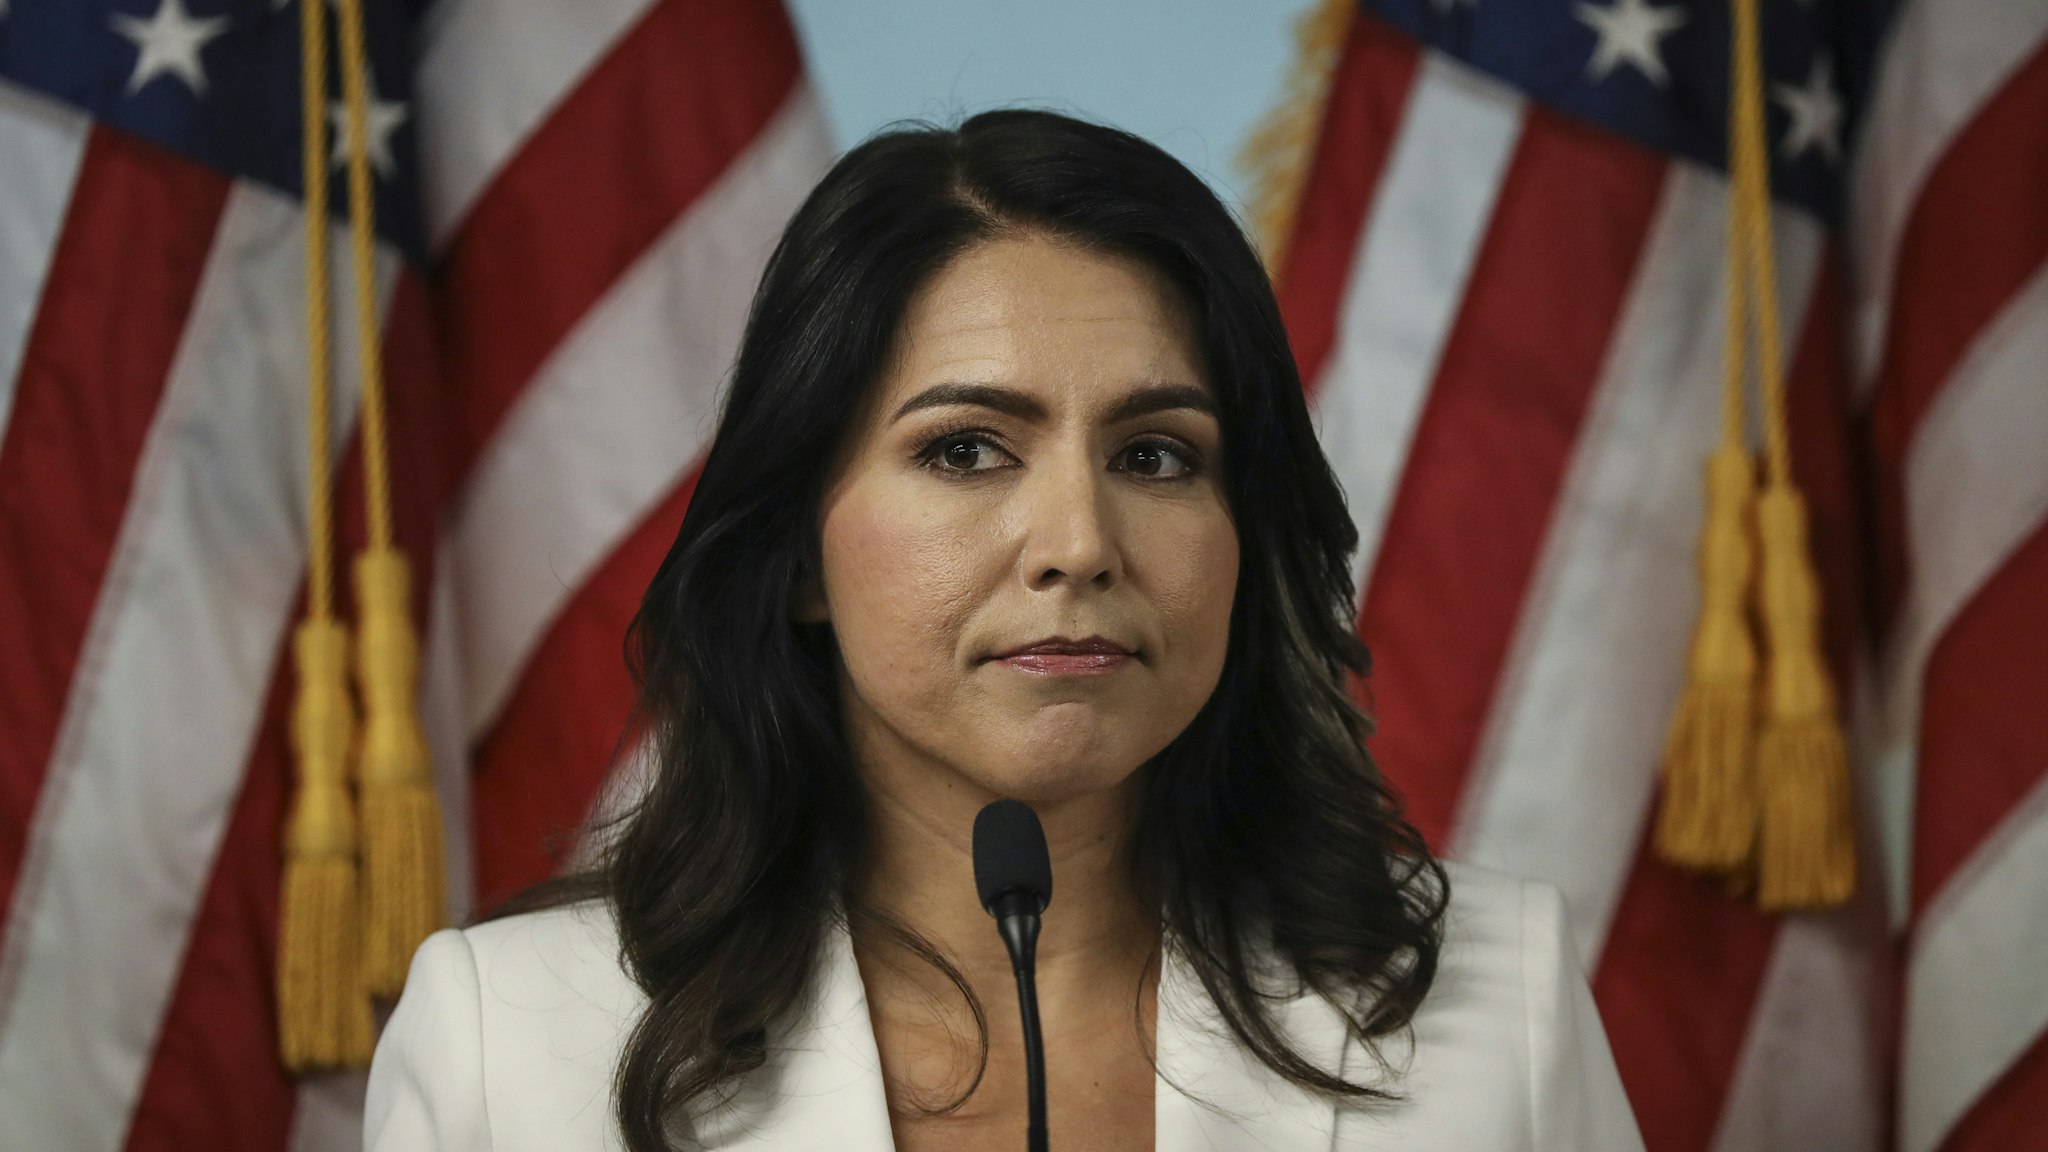 Democratic presidential candidate Rep. Tulsi Gabbard (D-HI) speaks during a press conference at the 9/11 Tribute Museum in Lower Manhattan on October 29, 2019 in New York City. Gabbard called for the U.S. Department of Justice and the FBI declassify and release 9/11 investigative documents that she claims would implicate the Kingdom of Saudi Arabia in the 2001 terrorist attacks.